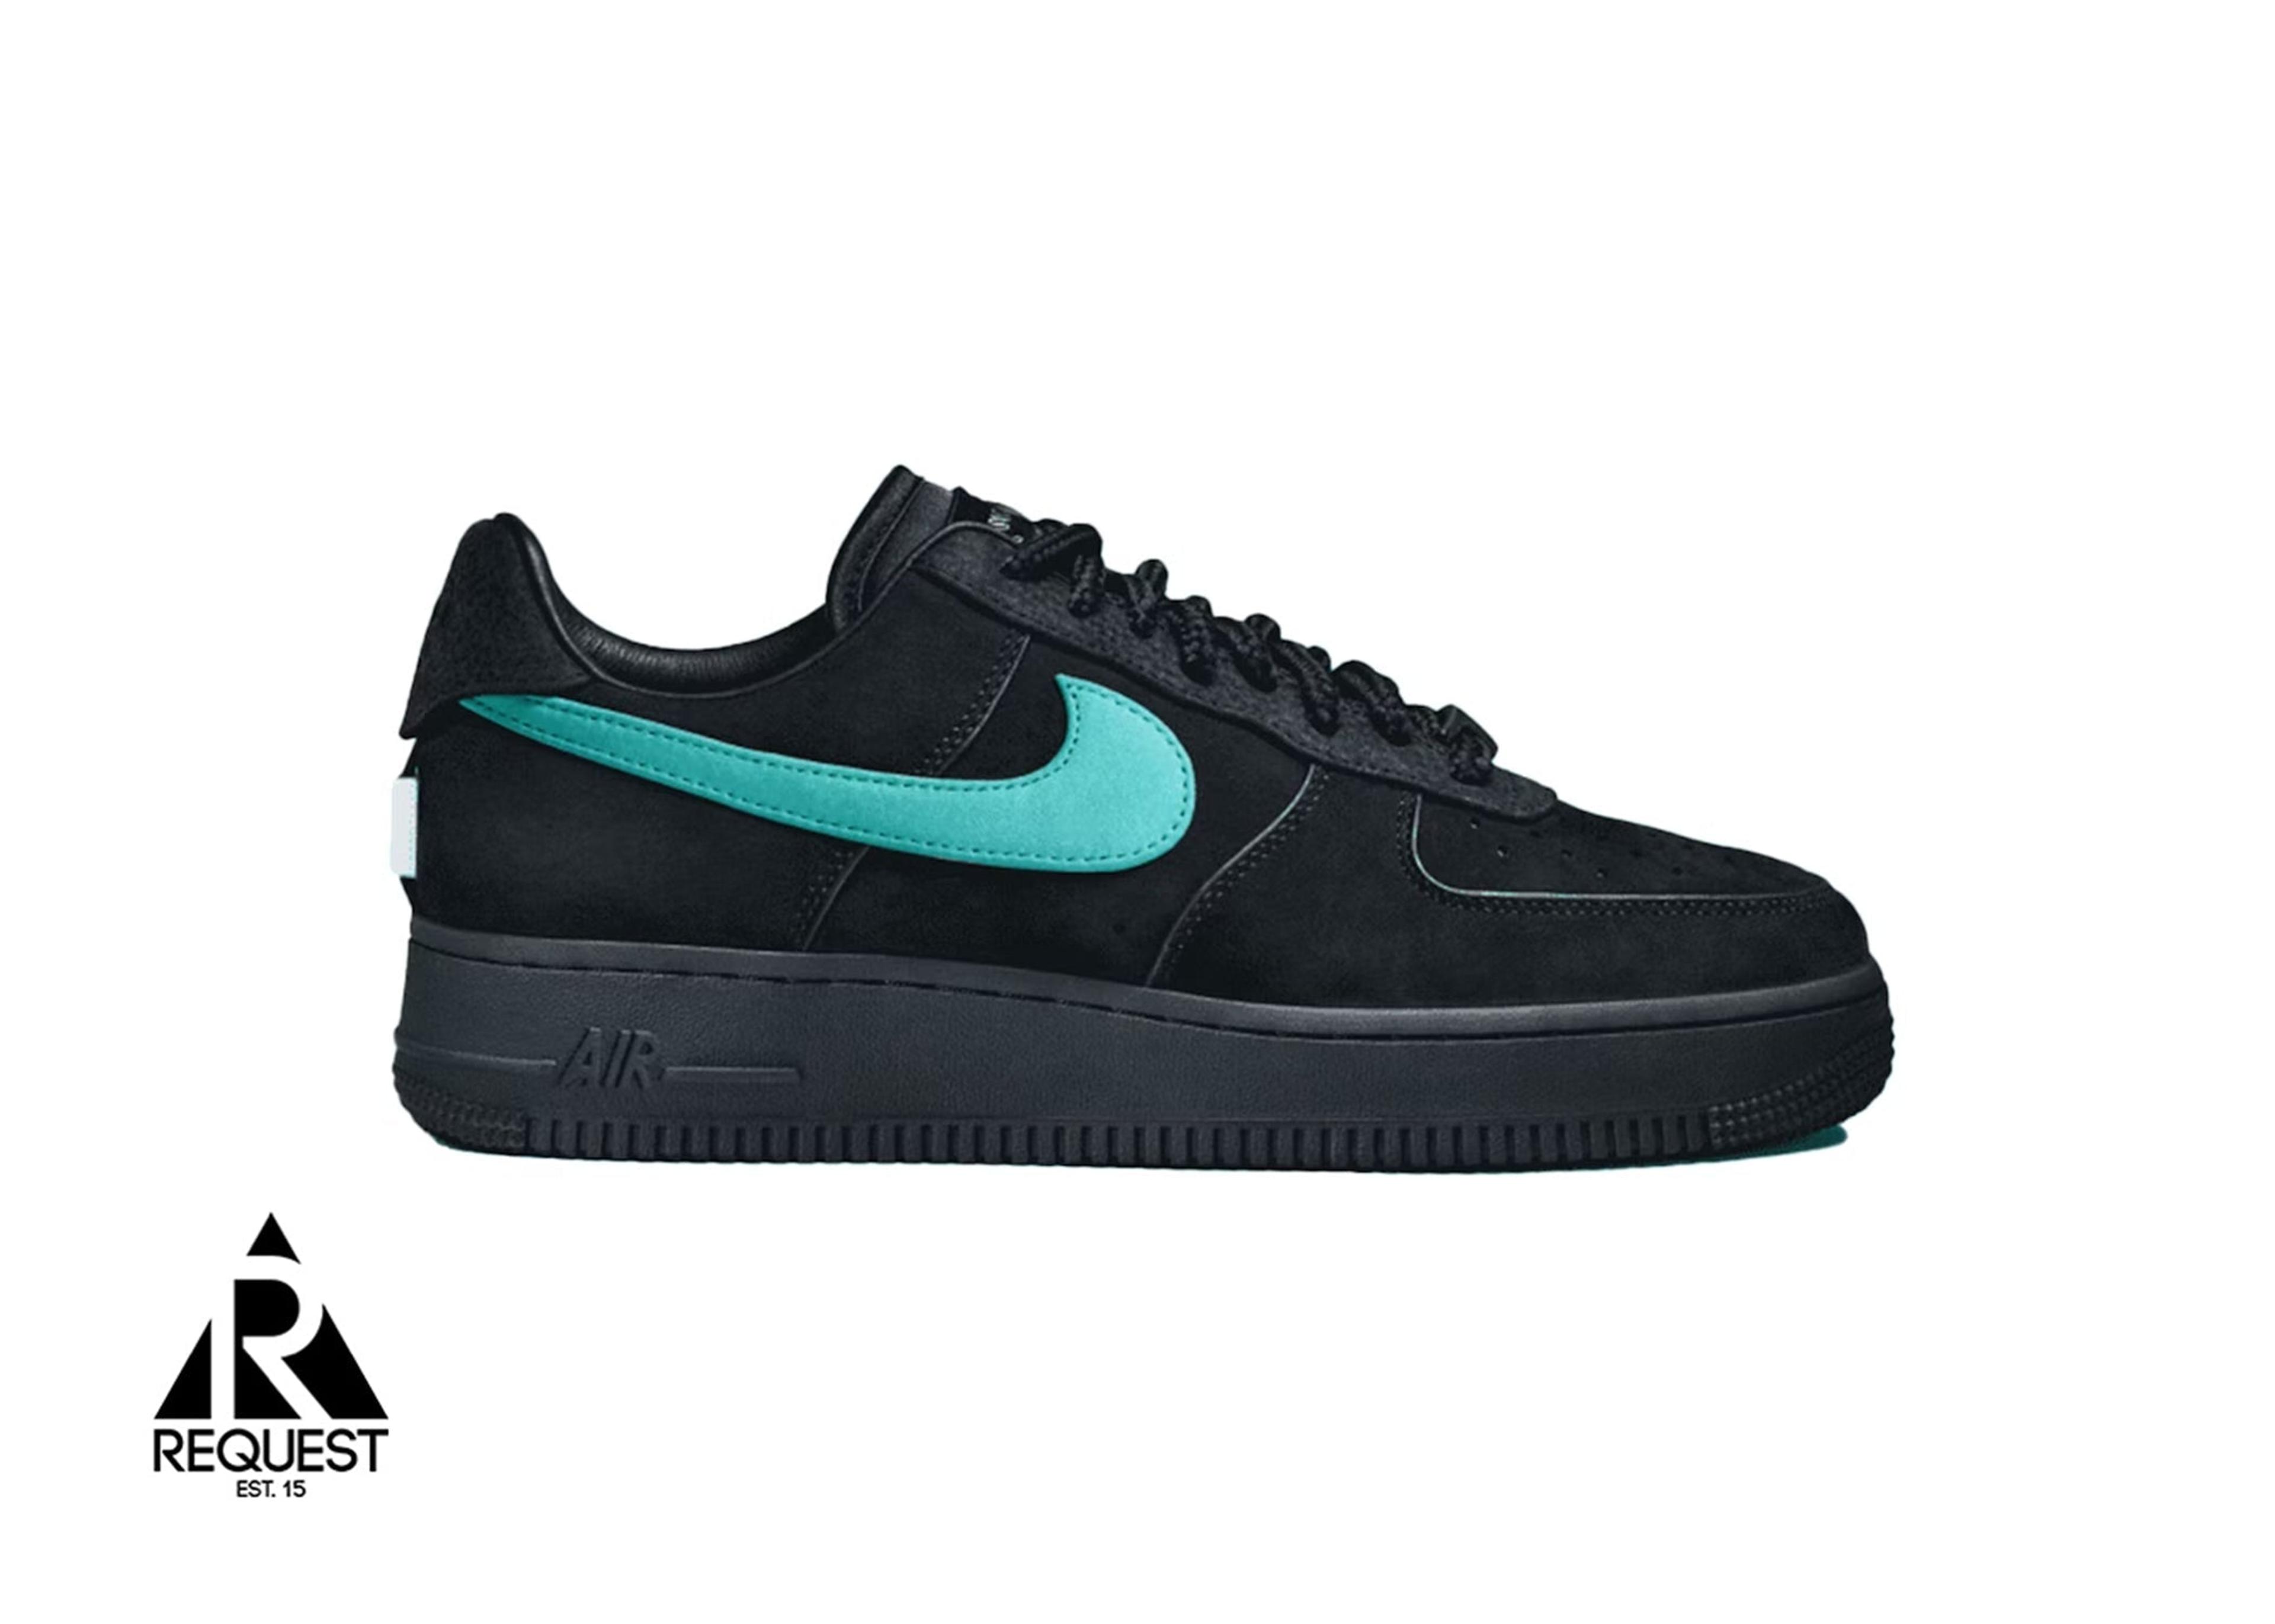 Nike Air Force 1 Low SP "Tiffany & Co.”